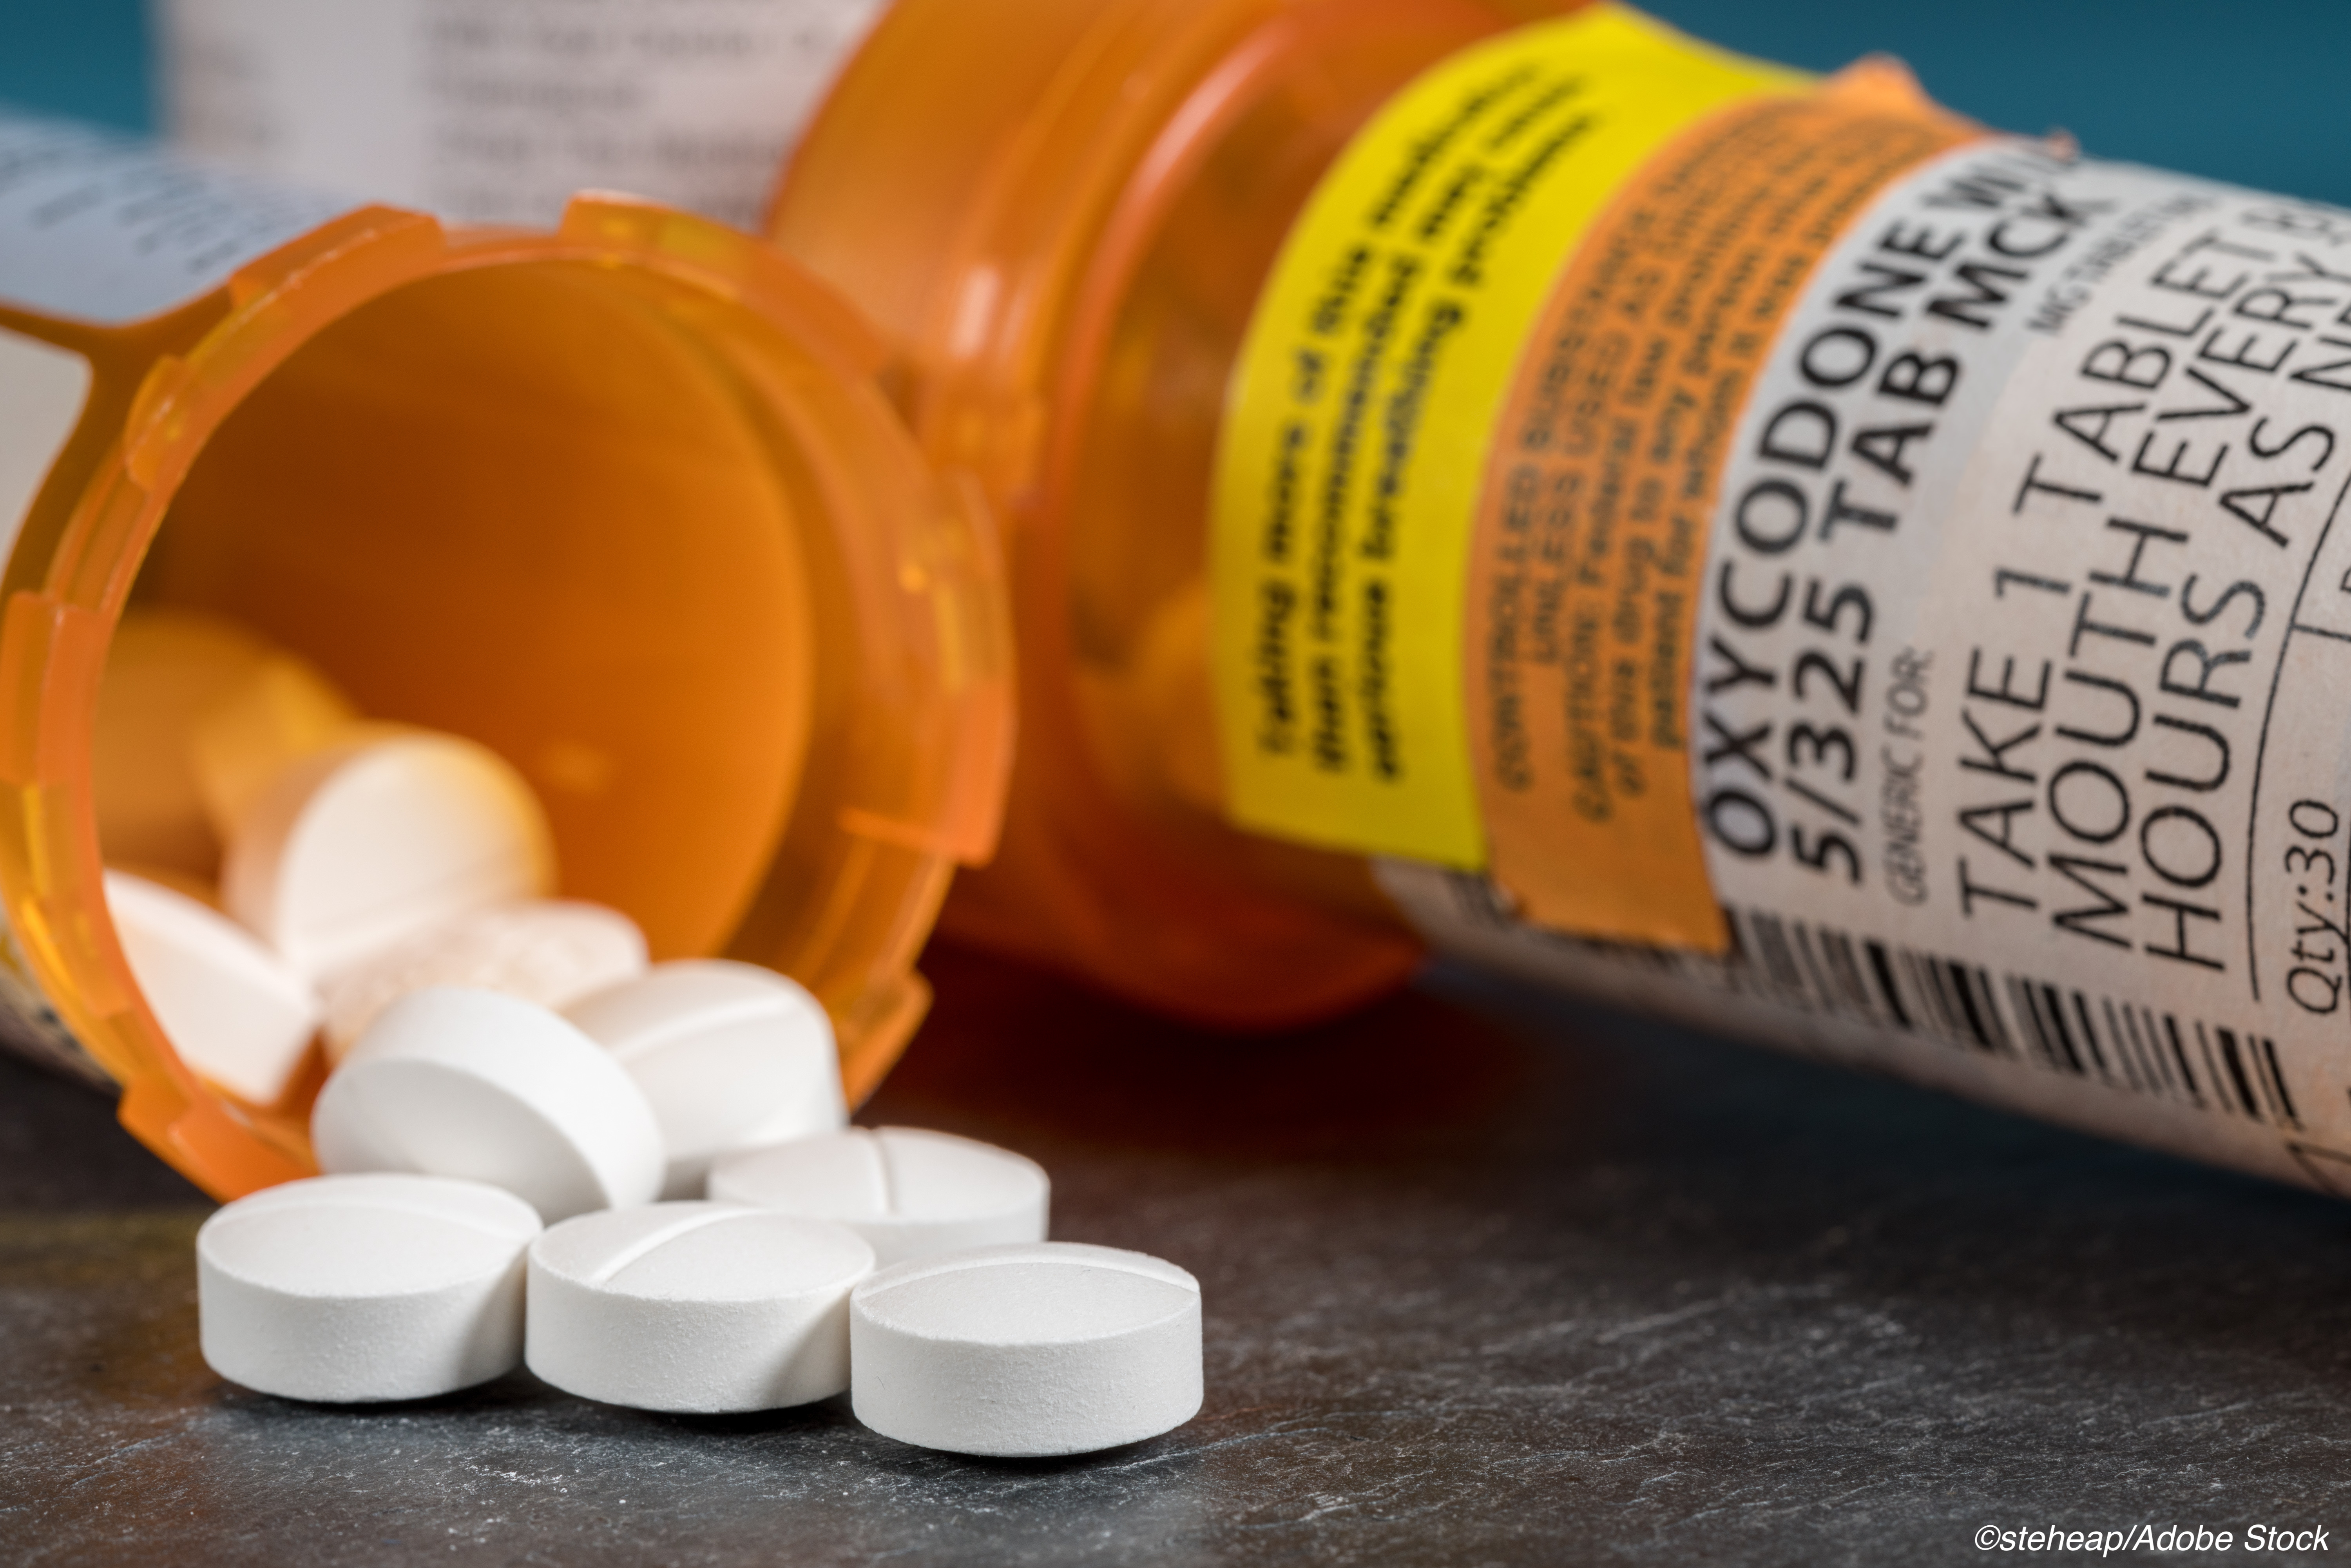 Meta-Analysis: Opioid Interventions Reduce Rx Rates, But Not Quantities